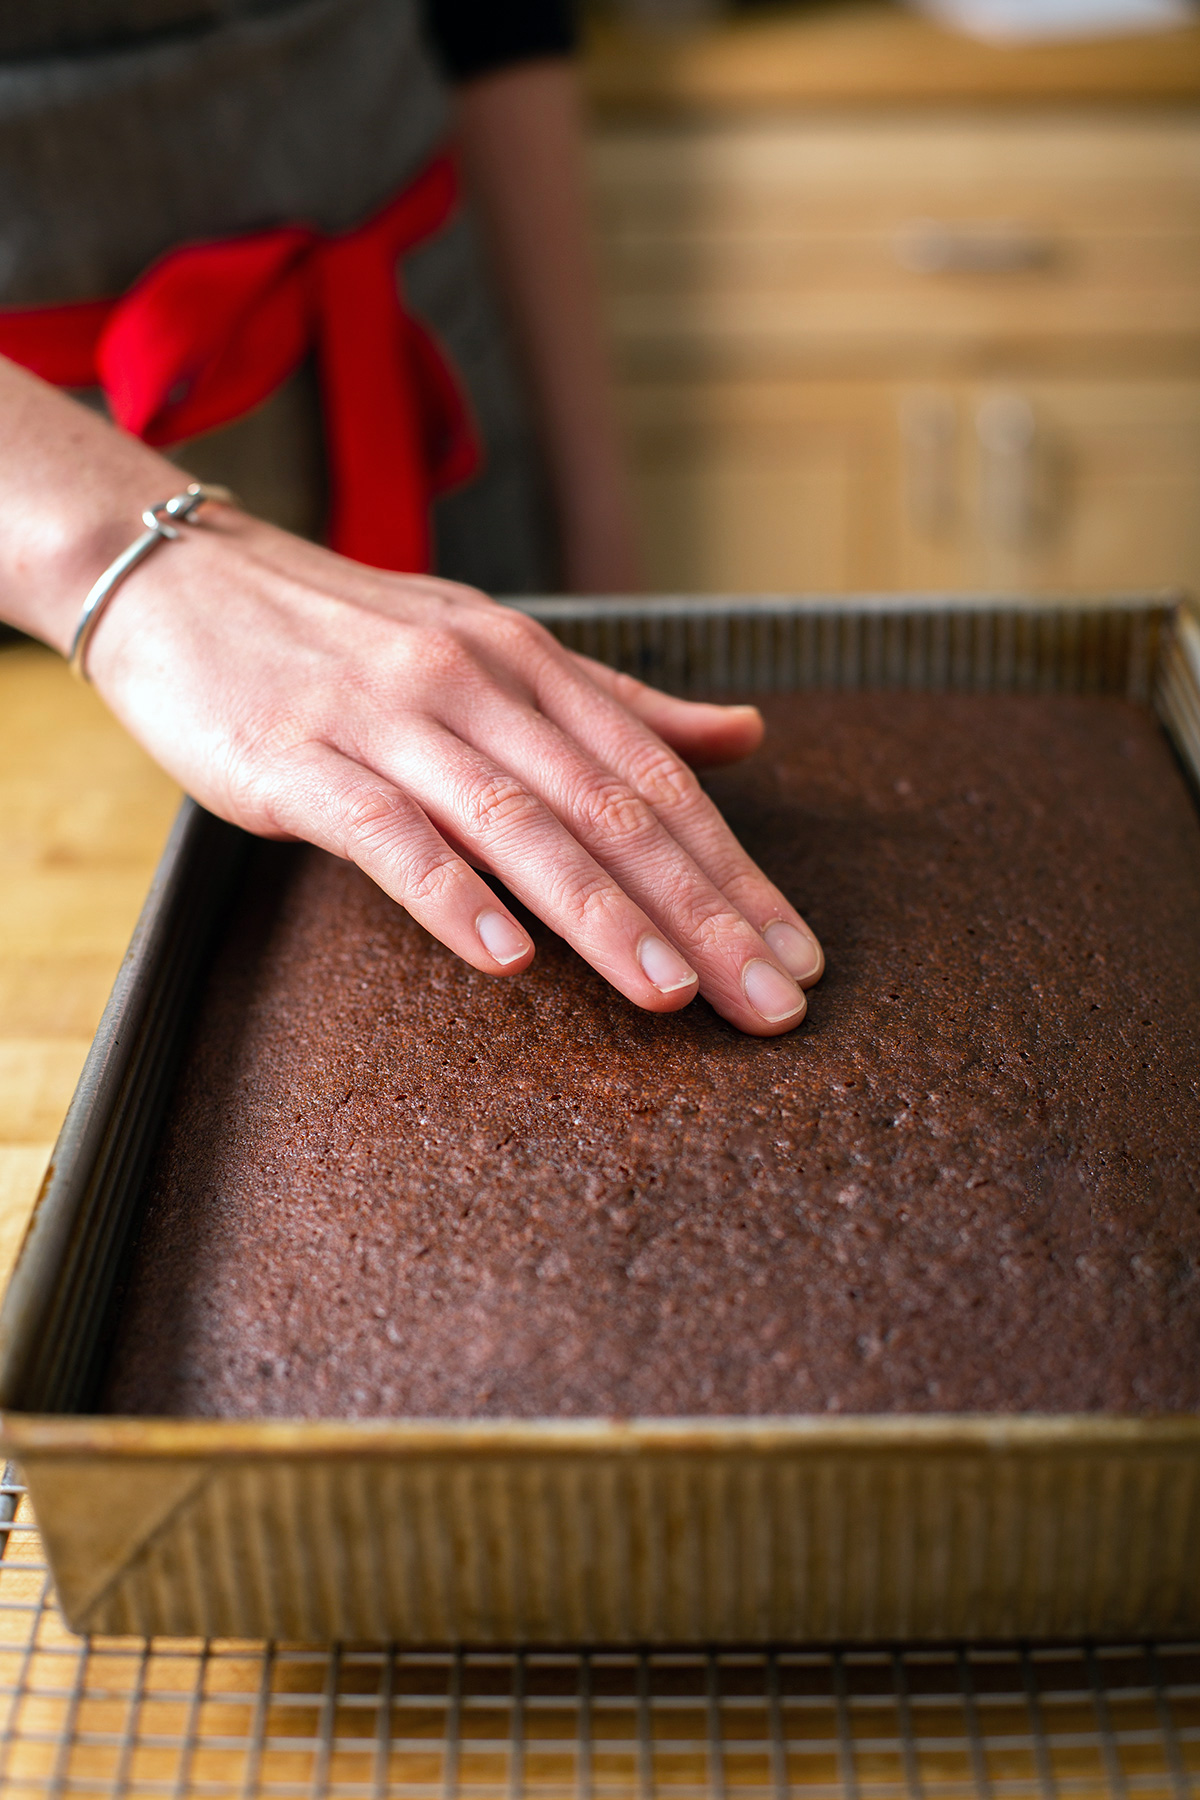 A baker pressing on the center of a chocolate cake to see if it's springy and done baking